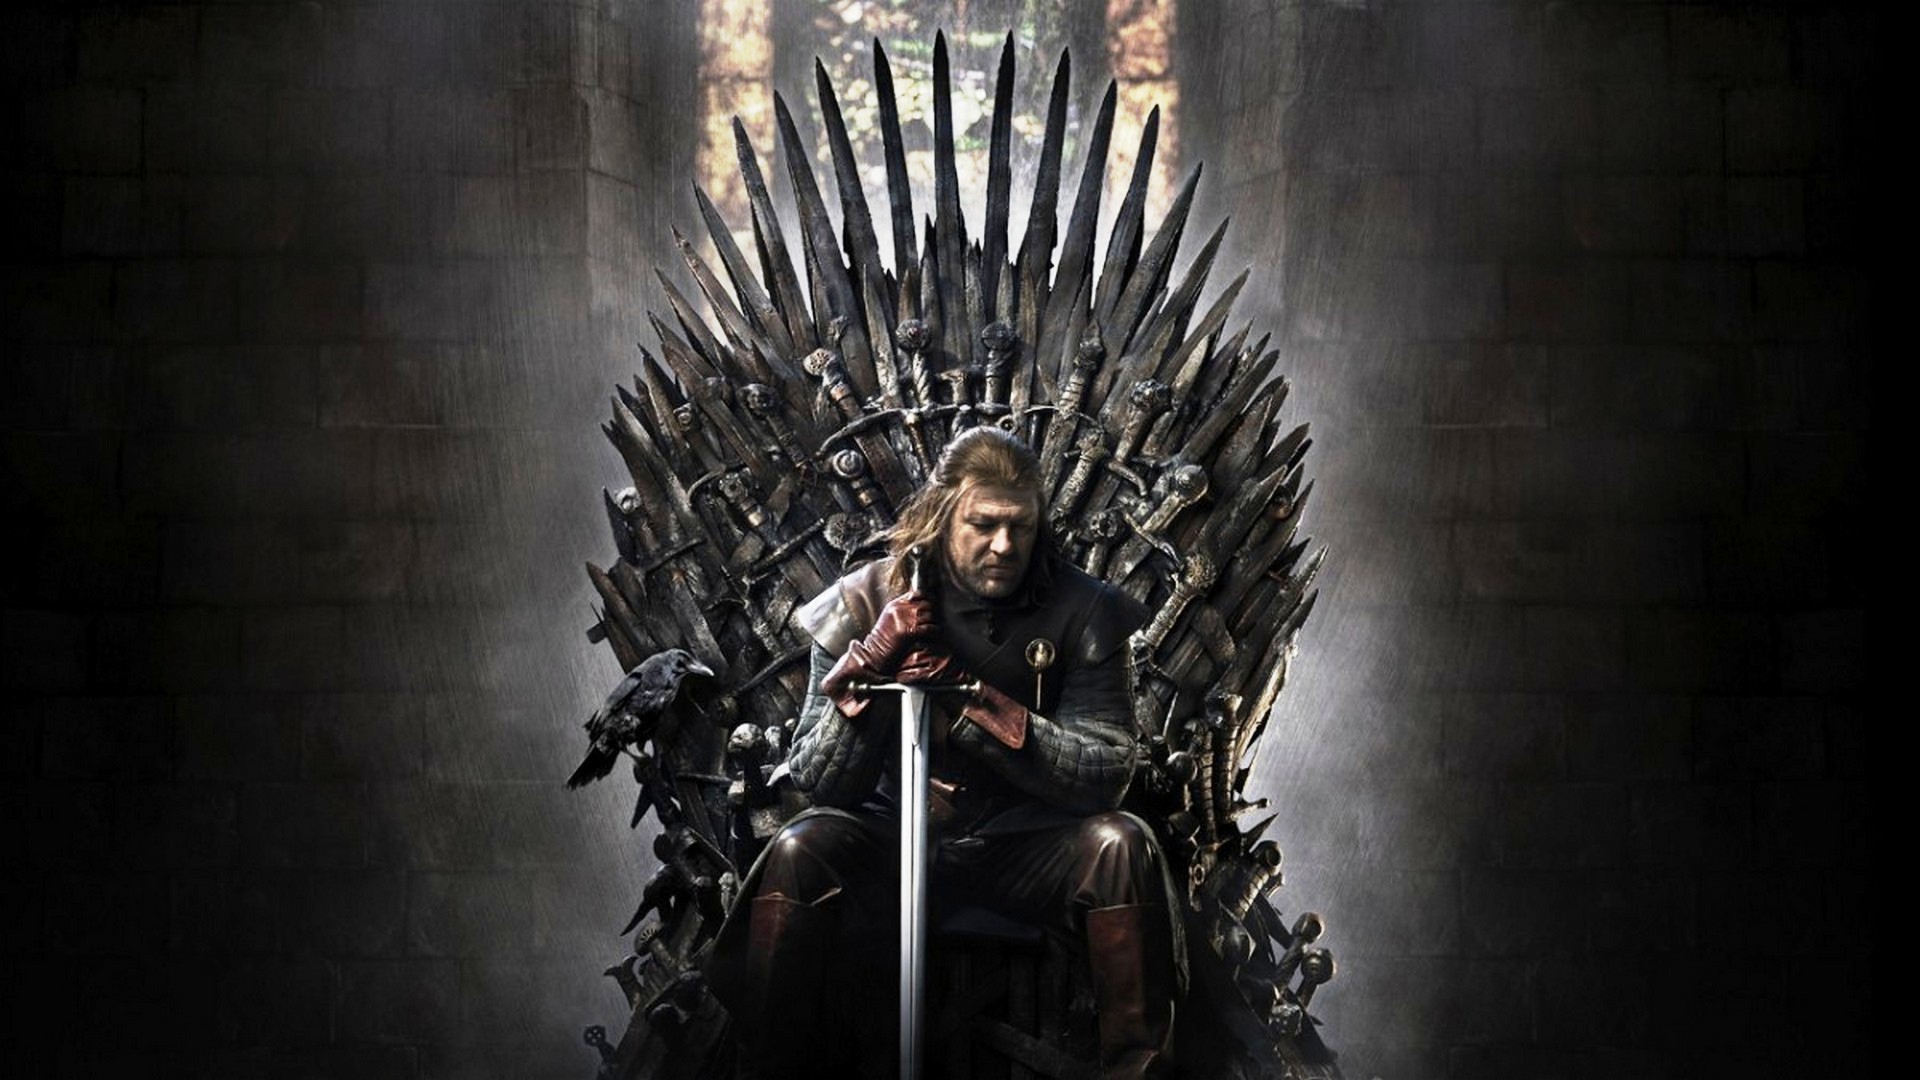 Wallpapers HD Game of Thrones with high-resolution 1920x1080 pixel. You can use this poster wallpaper for your Desktop Computers, Mac Screensavers, Windows Backgrounds, iPhone Wallpapers, Tablet or Android Lock screen and another Mobile device